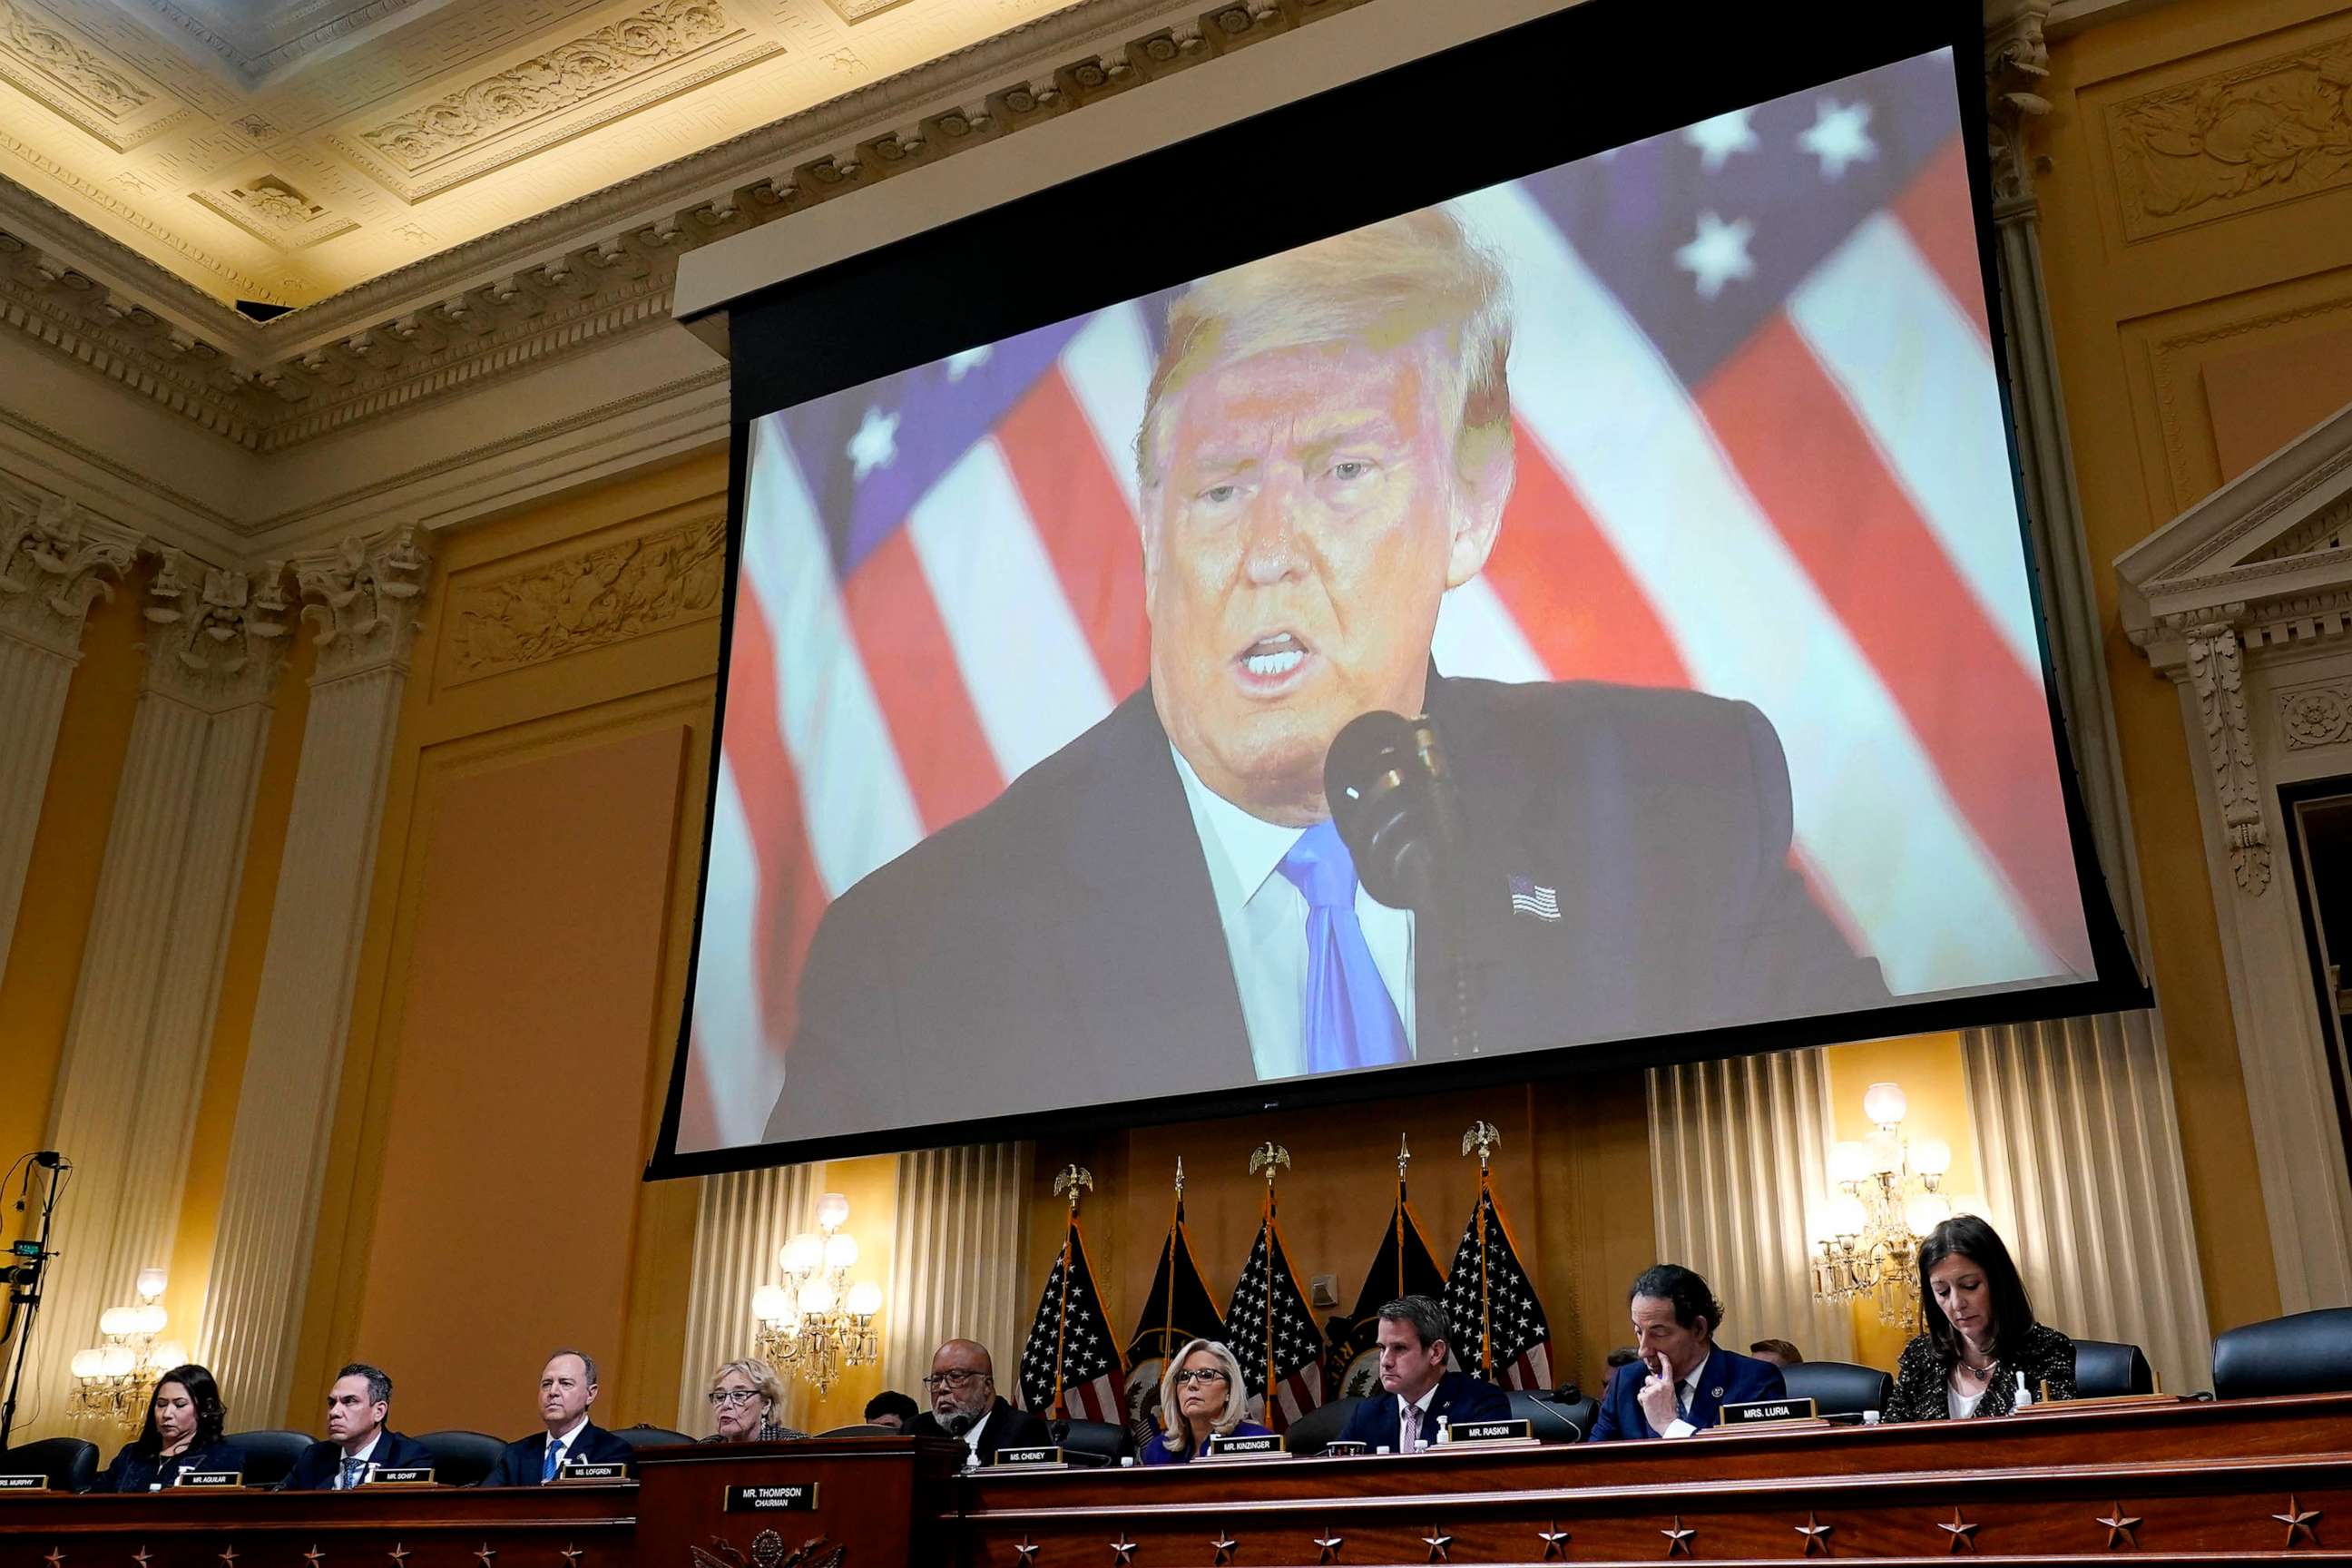 PHOTO: FILE - A video of former President Donald Trump is shown on a screen, as the House select committee investigating the Jan. 6 attack on the U.S. Capitol holds its final meeting on Capitol Hill in Washington, Dec. 19, 2022.